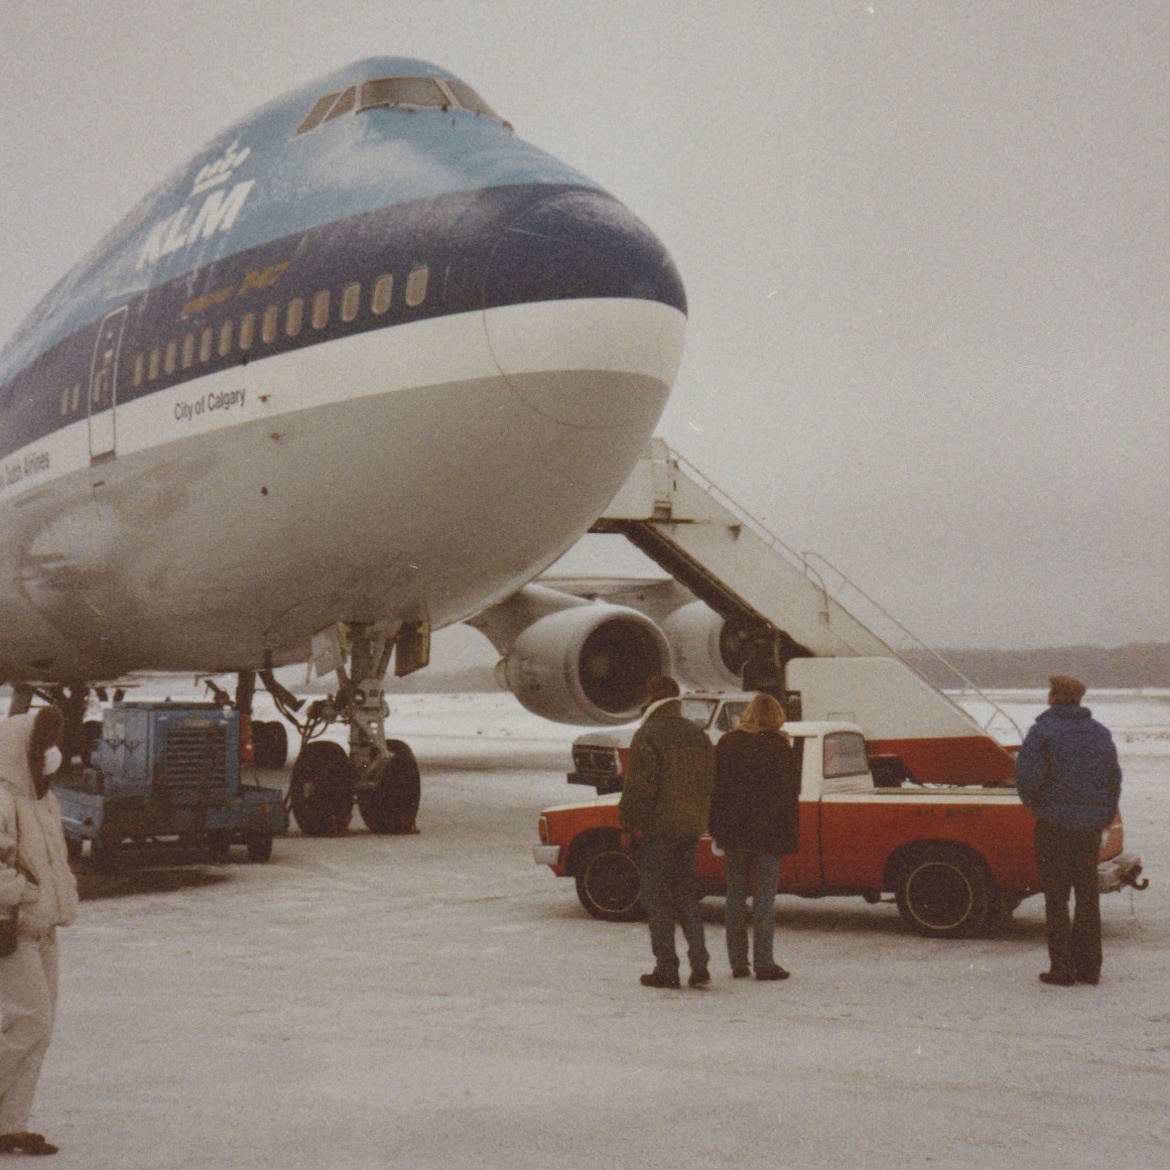 A KLM Boeing 747-406M PH-BFC is damaged after encountering ash cloud from Mt Redoubt in Alaska in December 1989. (Bauhaus345/Wikimedia Commons)